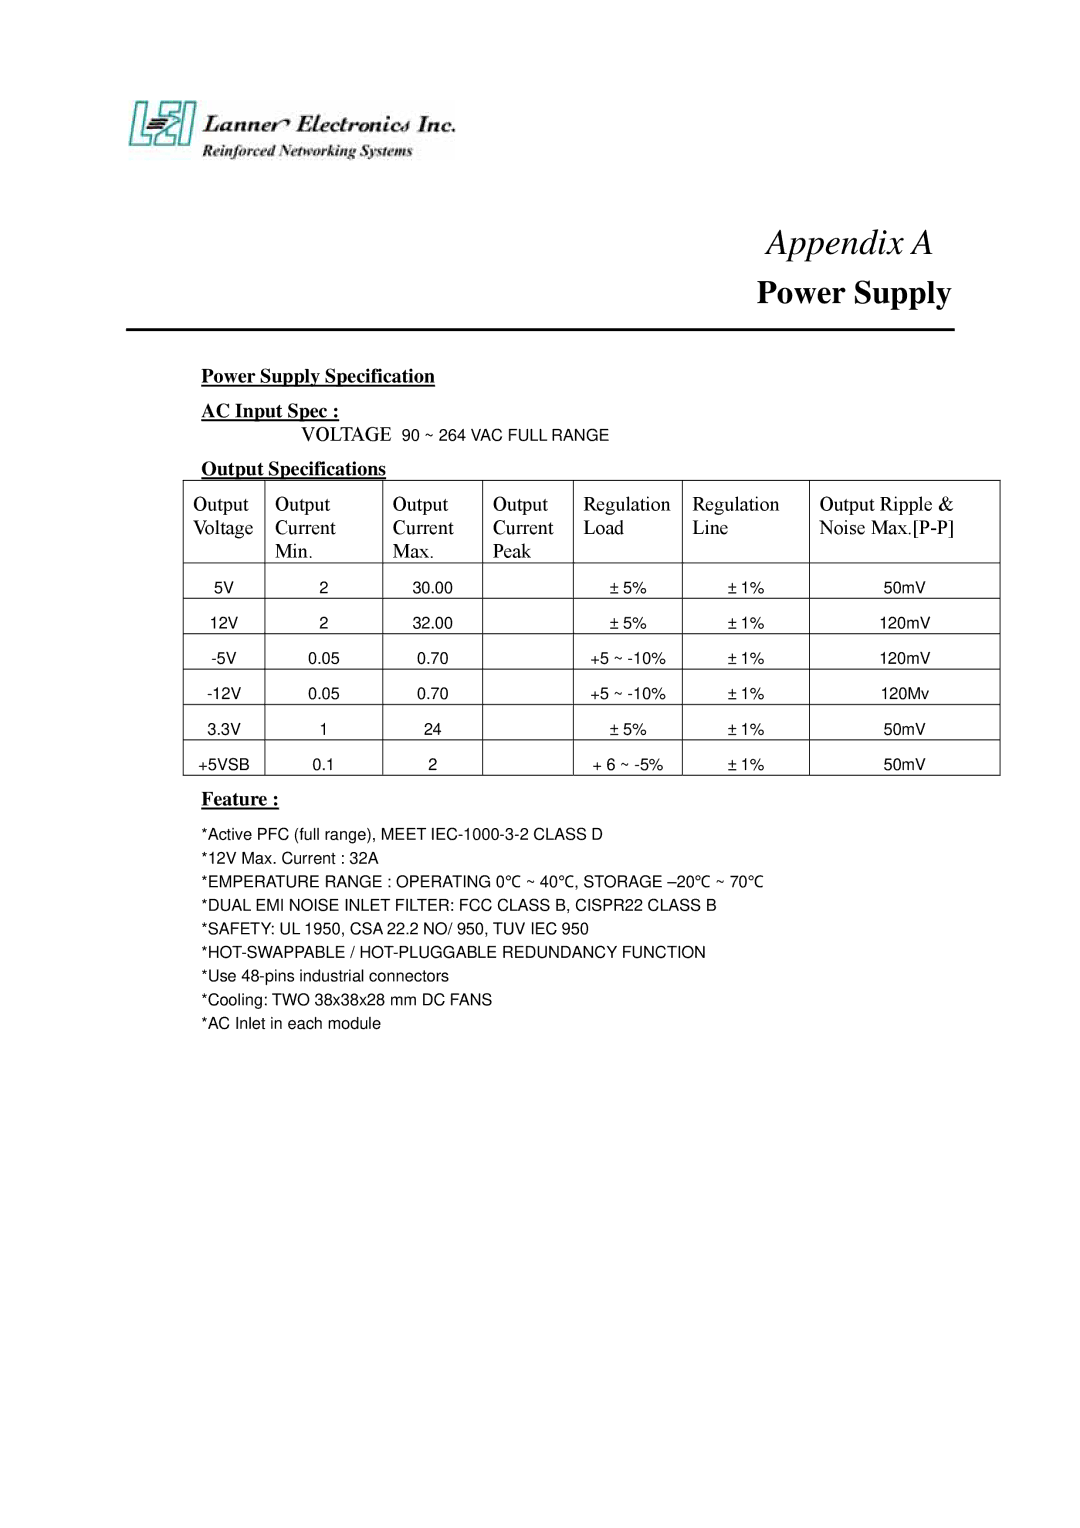 Lanner electronic FW-7870 user manual Power Supply Specification AC Input Spec, Output Specifications, Feature 